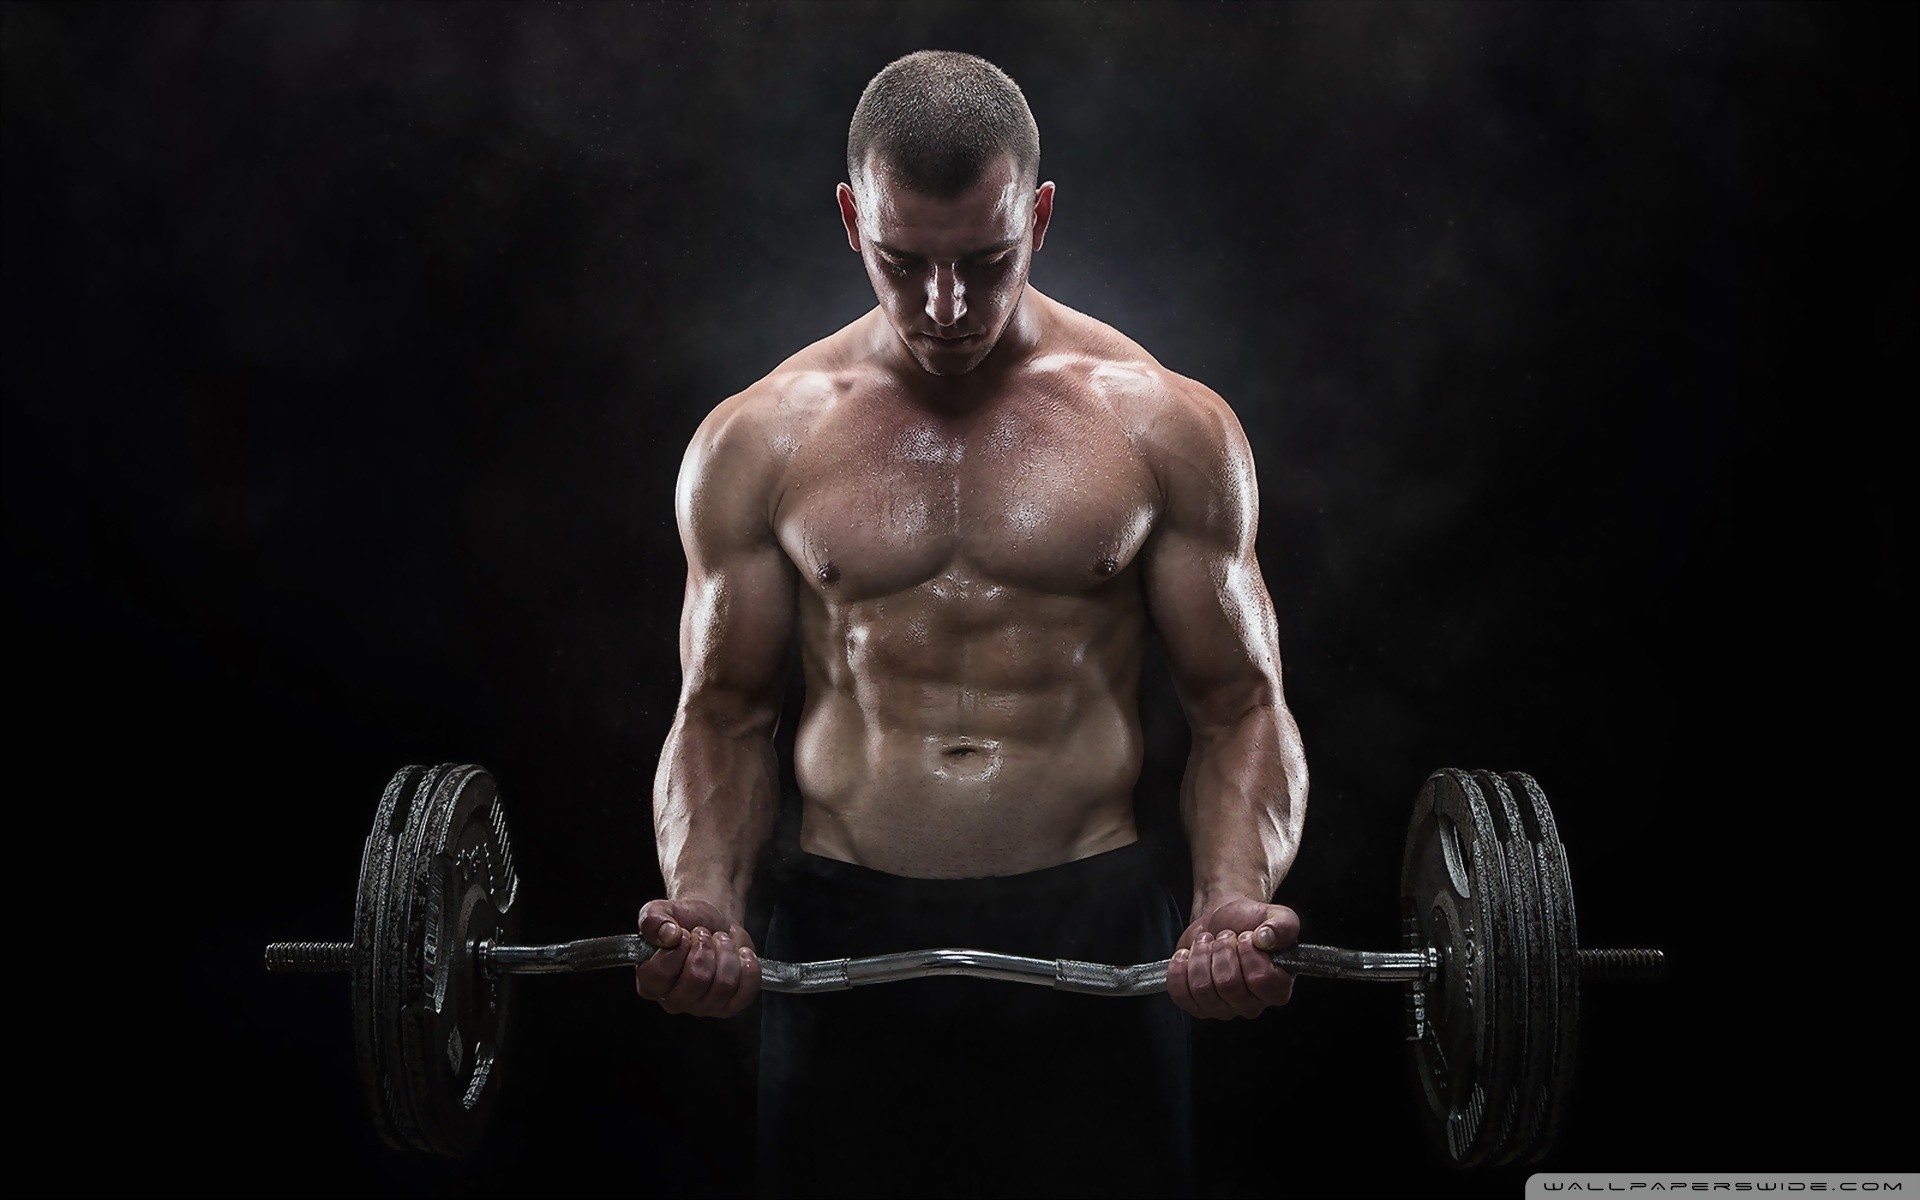 People 1920x1200 fitness model men muscles simple background weightlifting dark background muscular sport working out men indoors studio